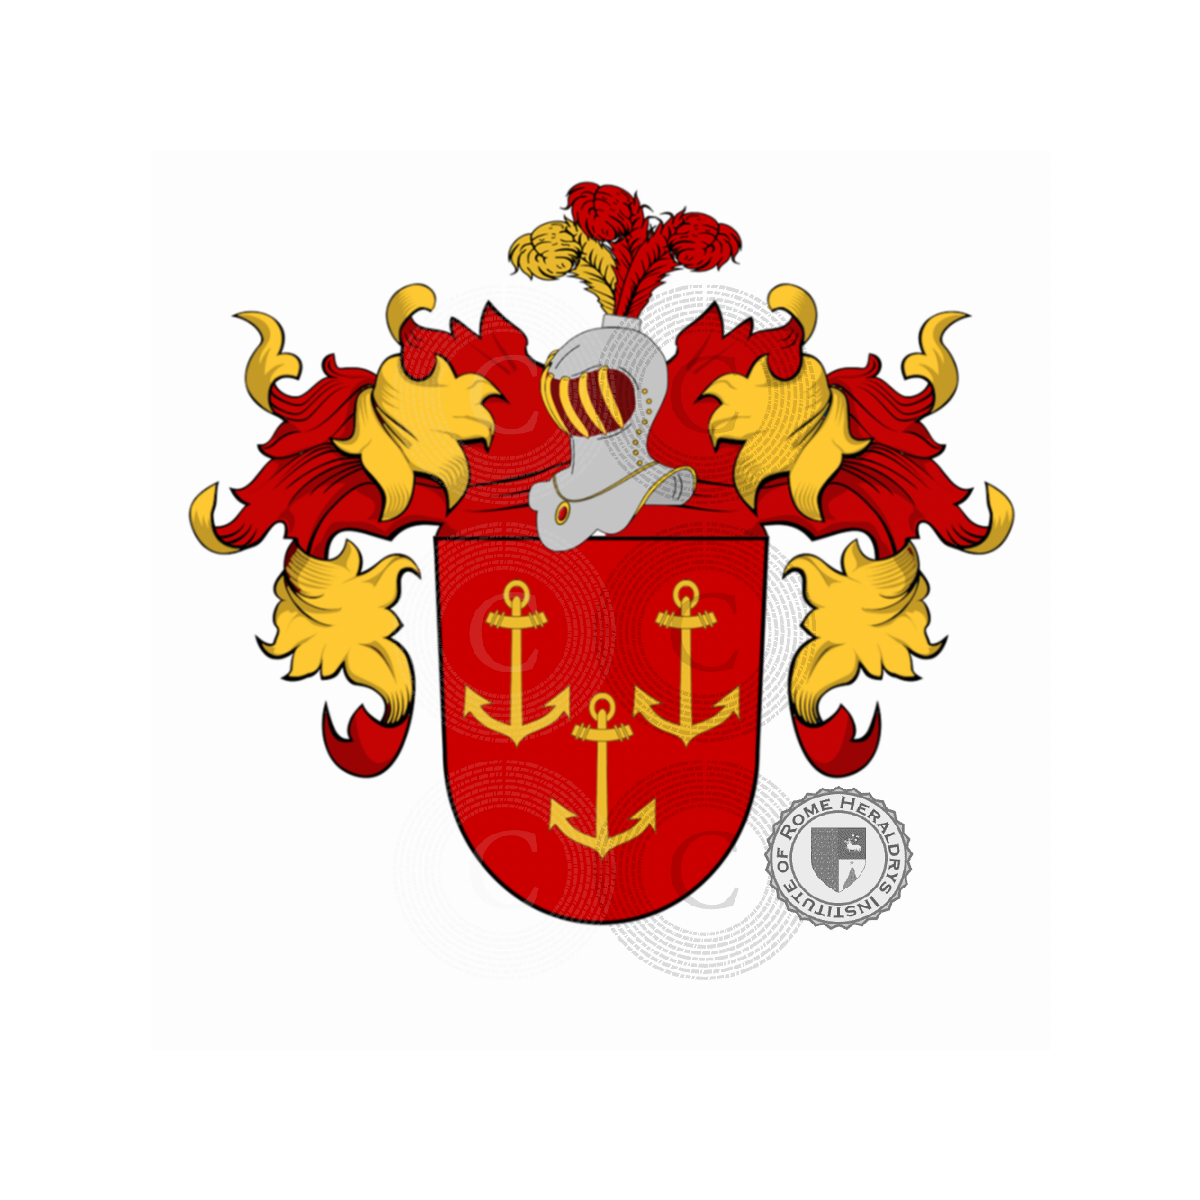 Coat of arms of familyWerle